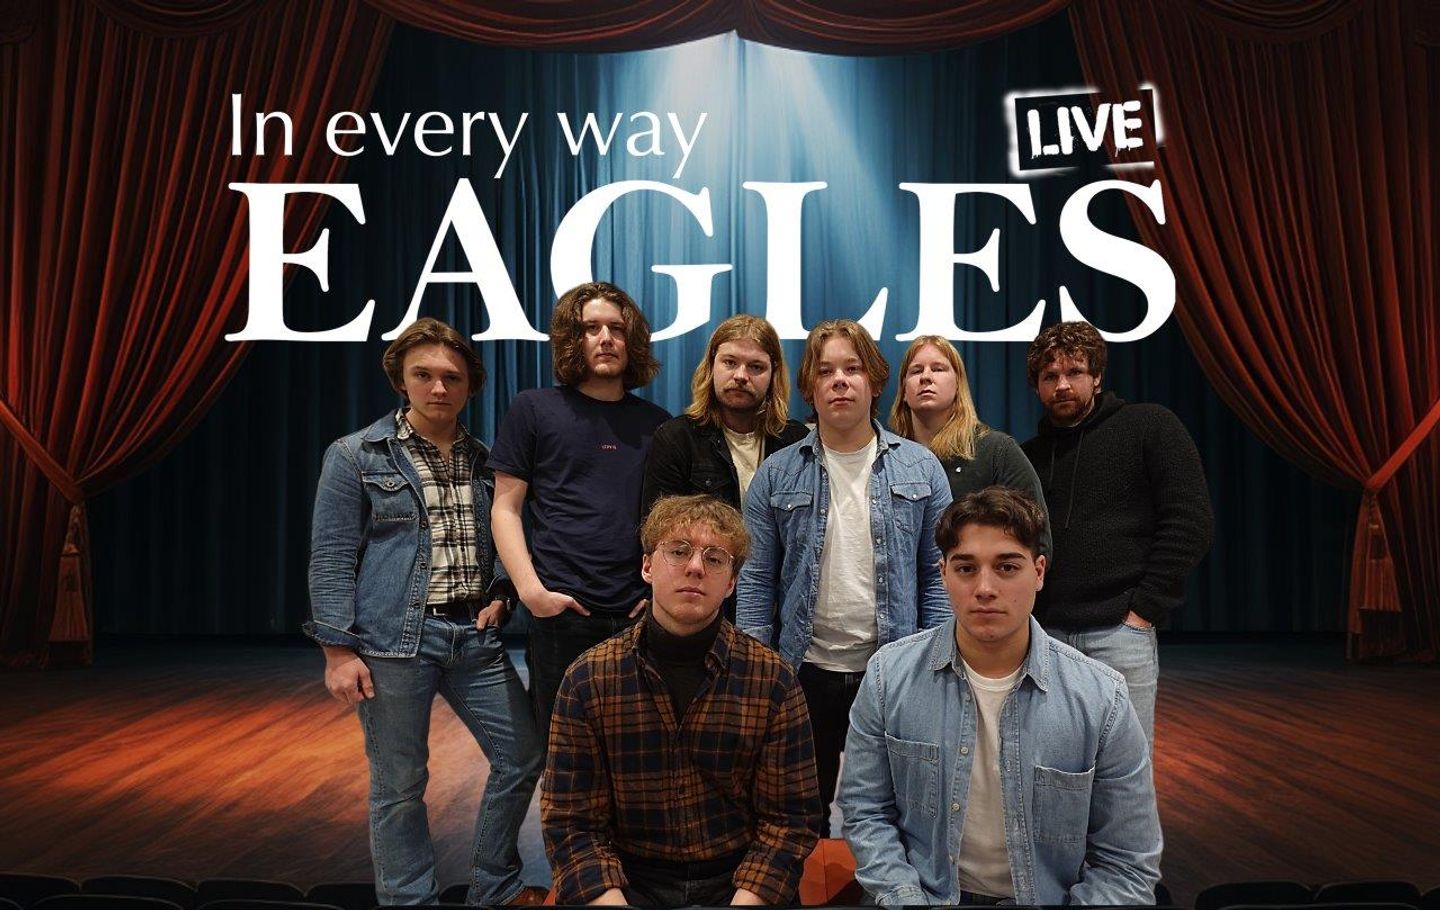 In every Way Eagles Live